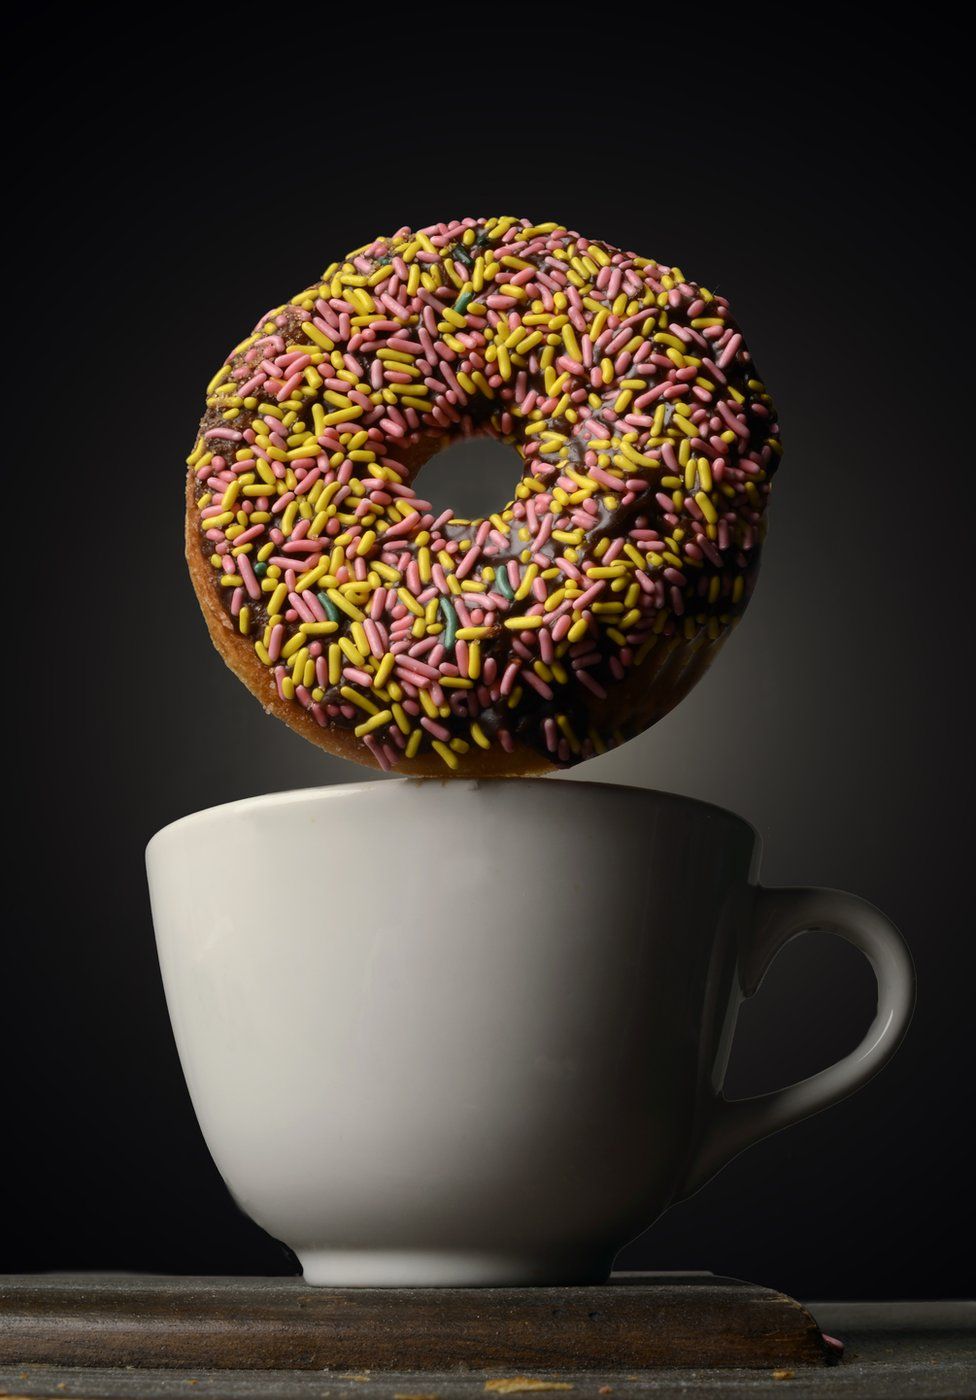 View of a sprinkle doughnut atop a coffee cup,